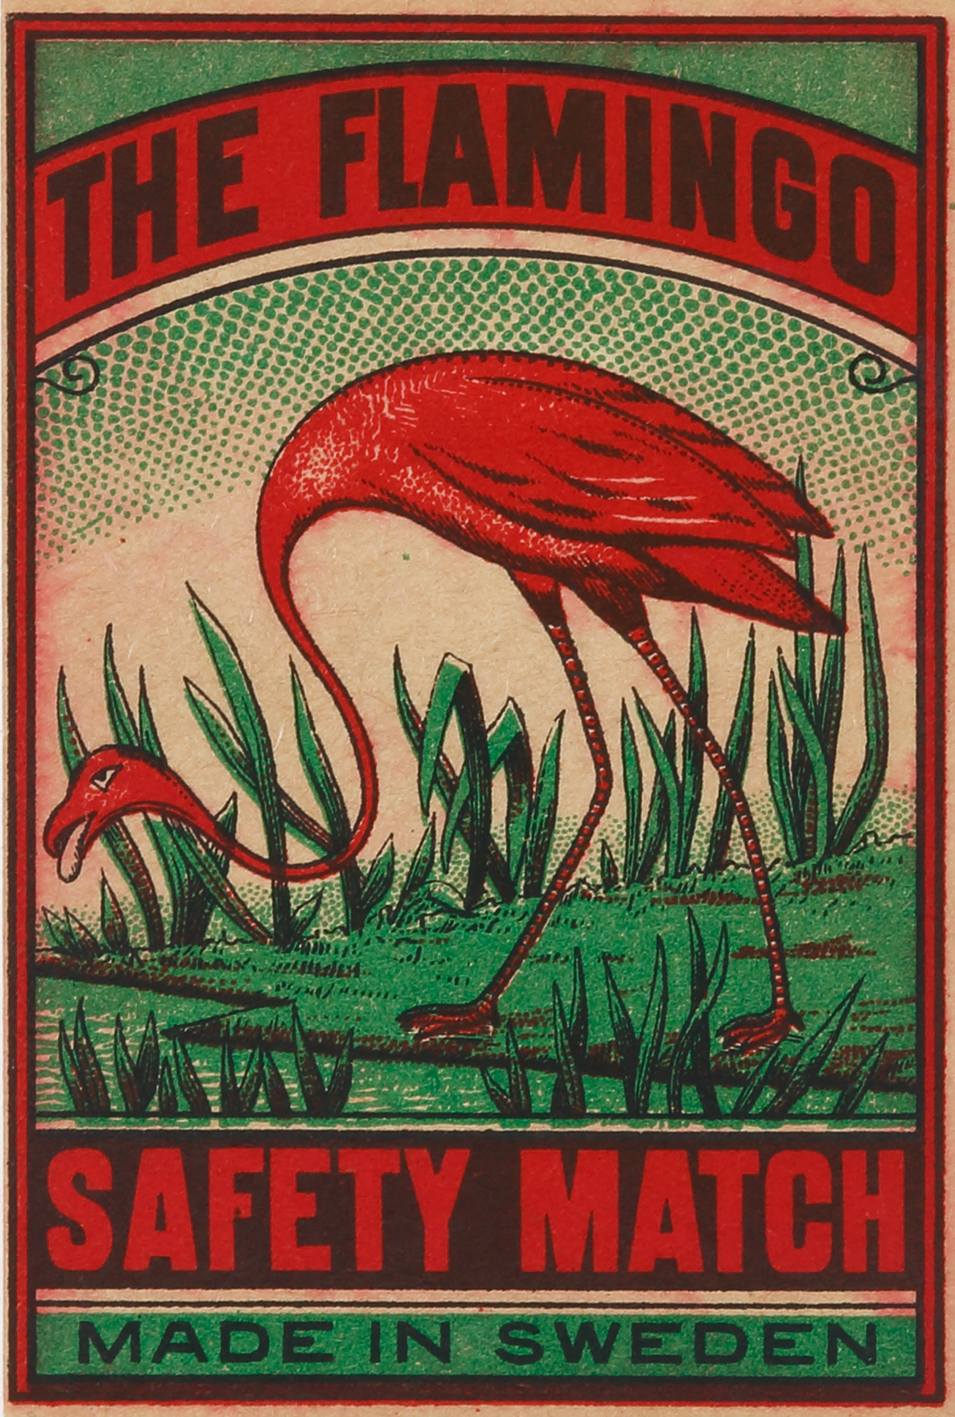 The Flamingo - Antique Print from 1920